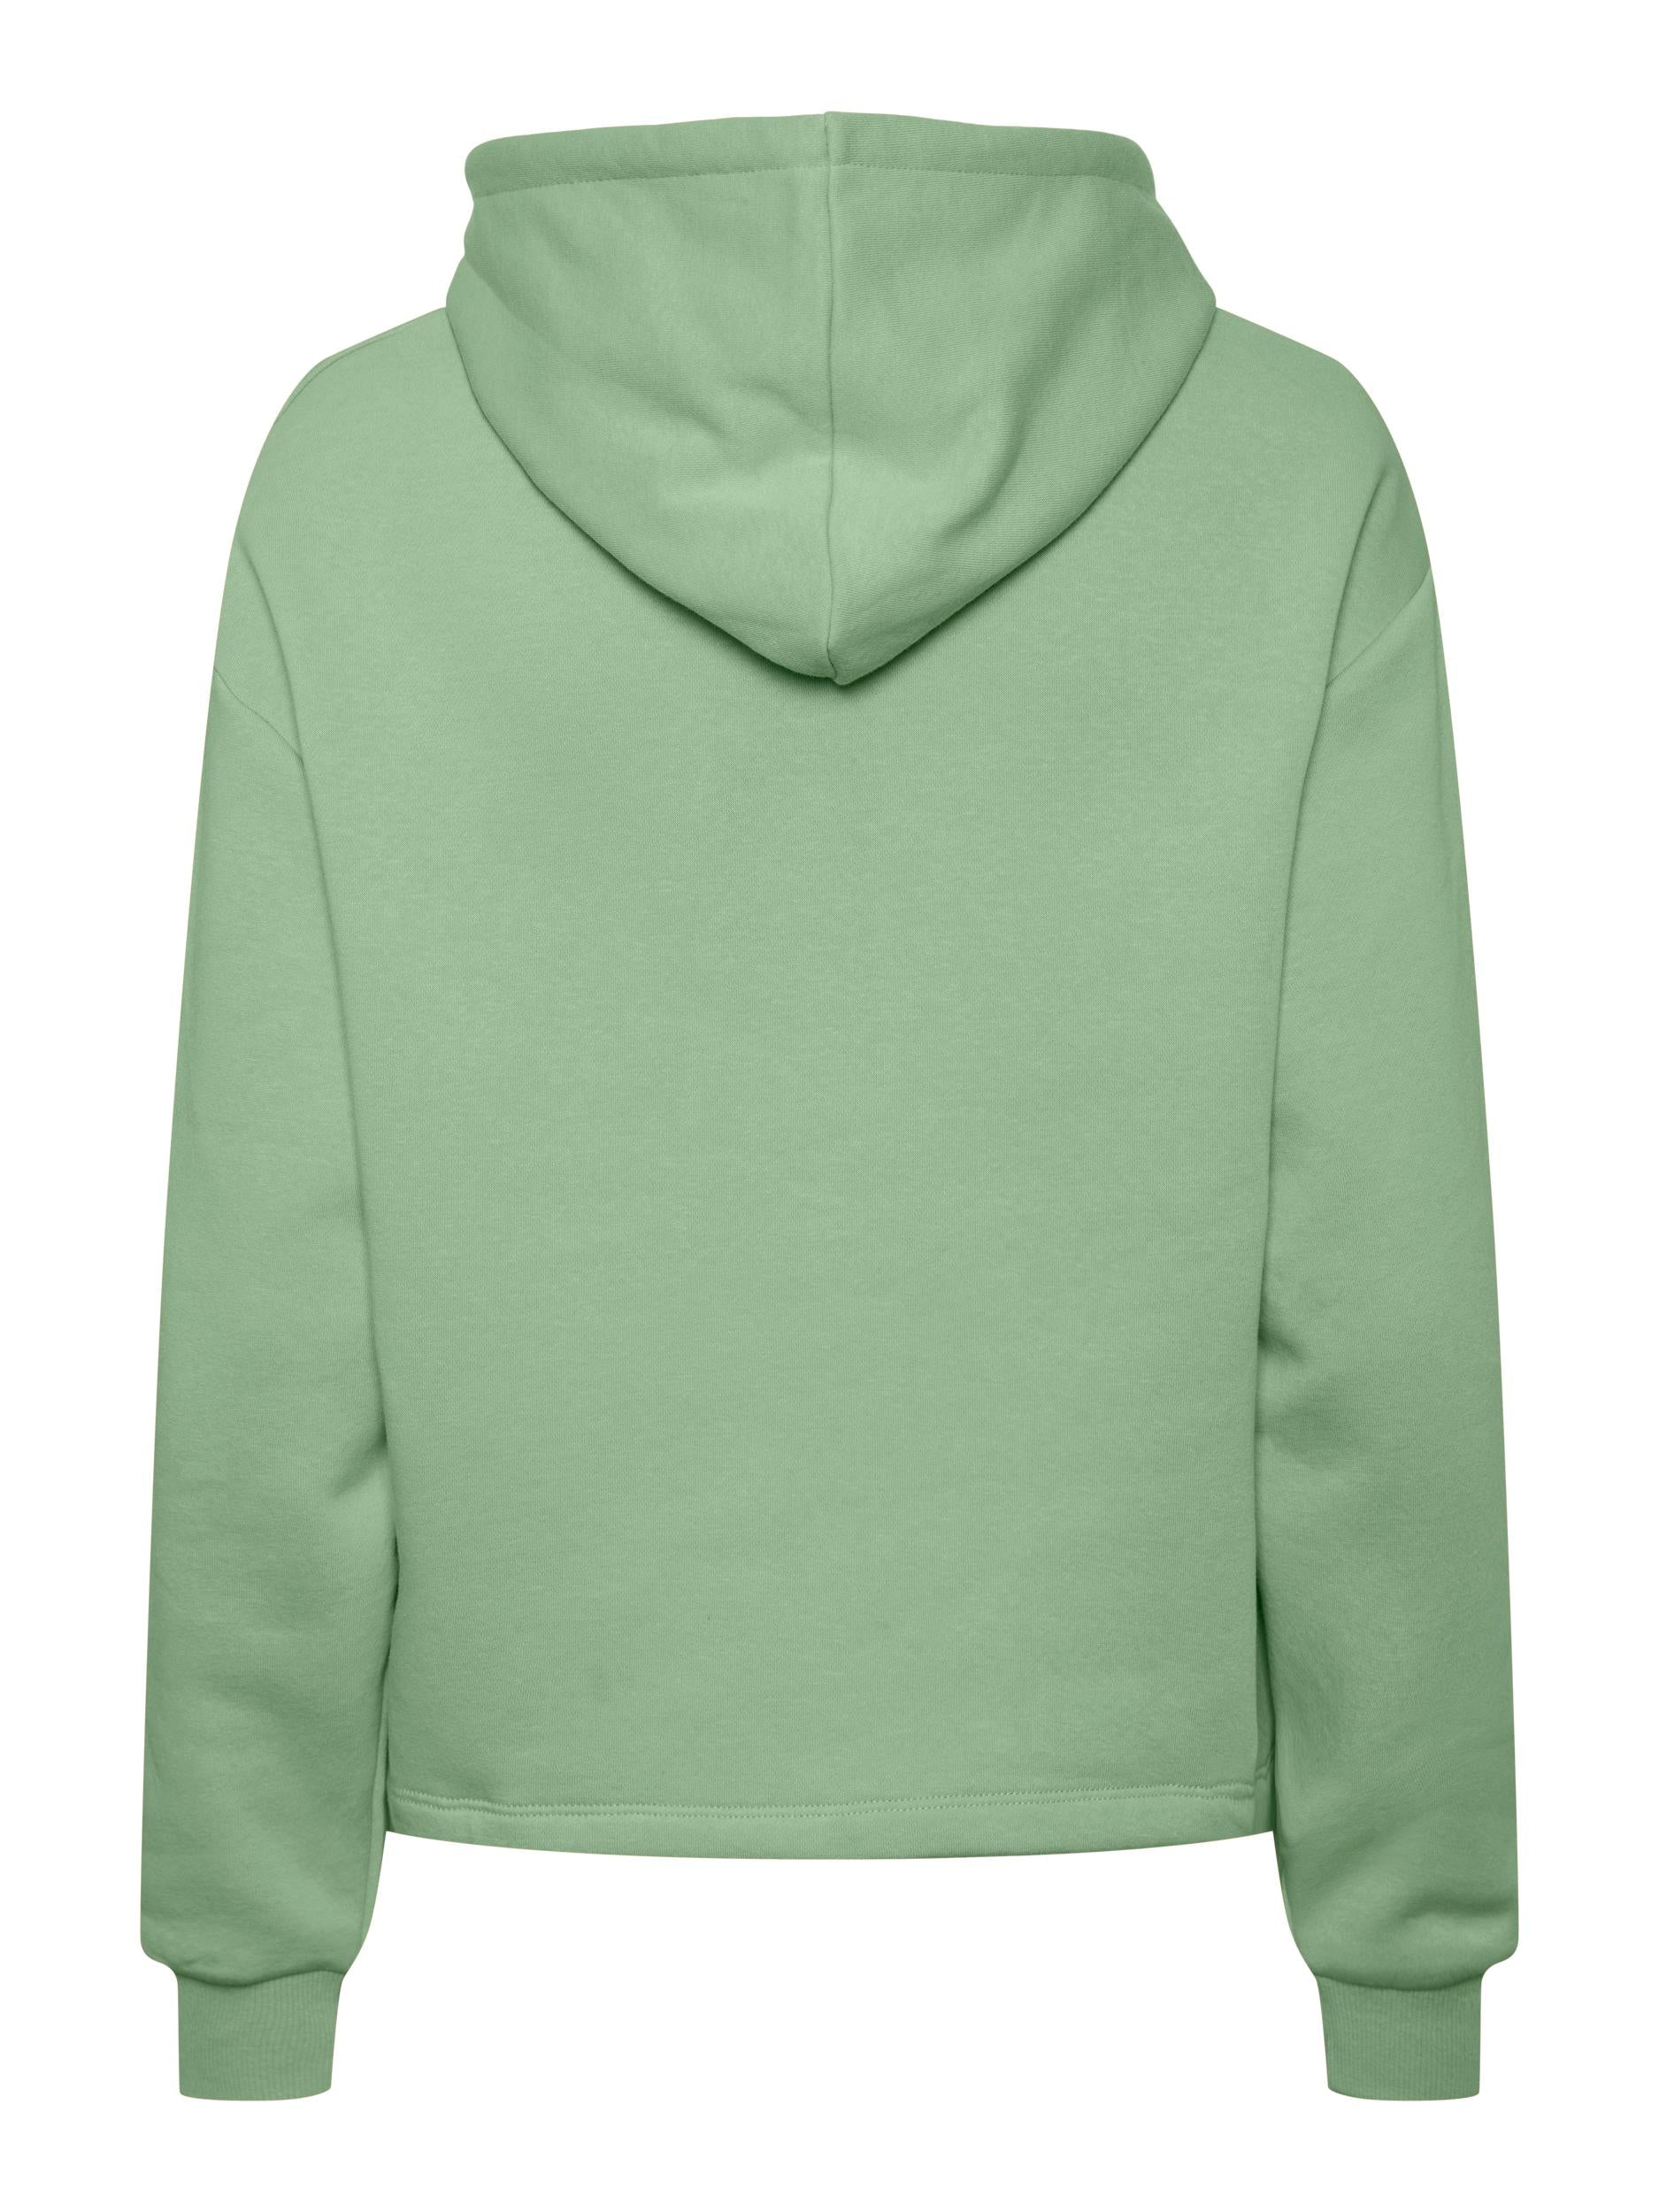 Pieces Chilli Hoodie- soft green